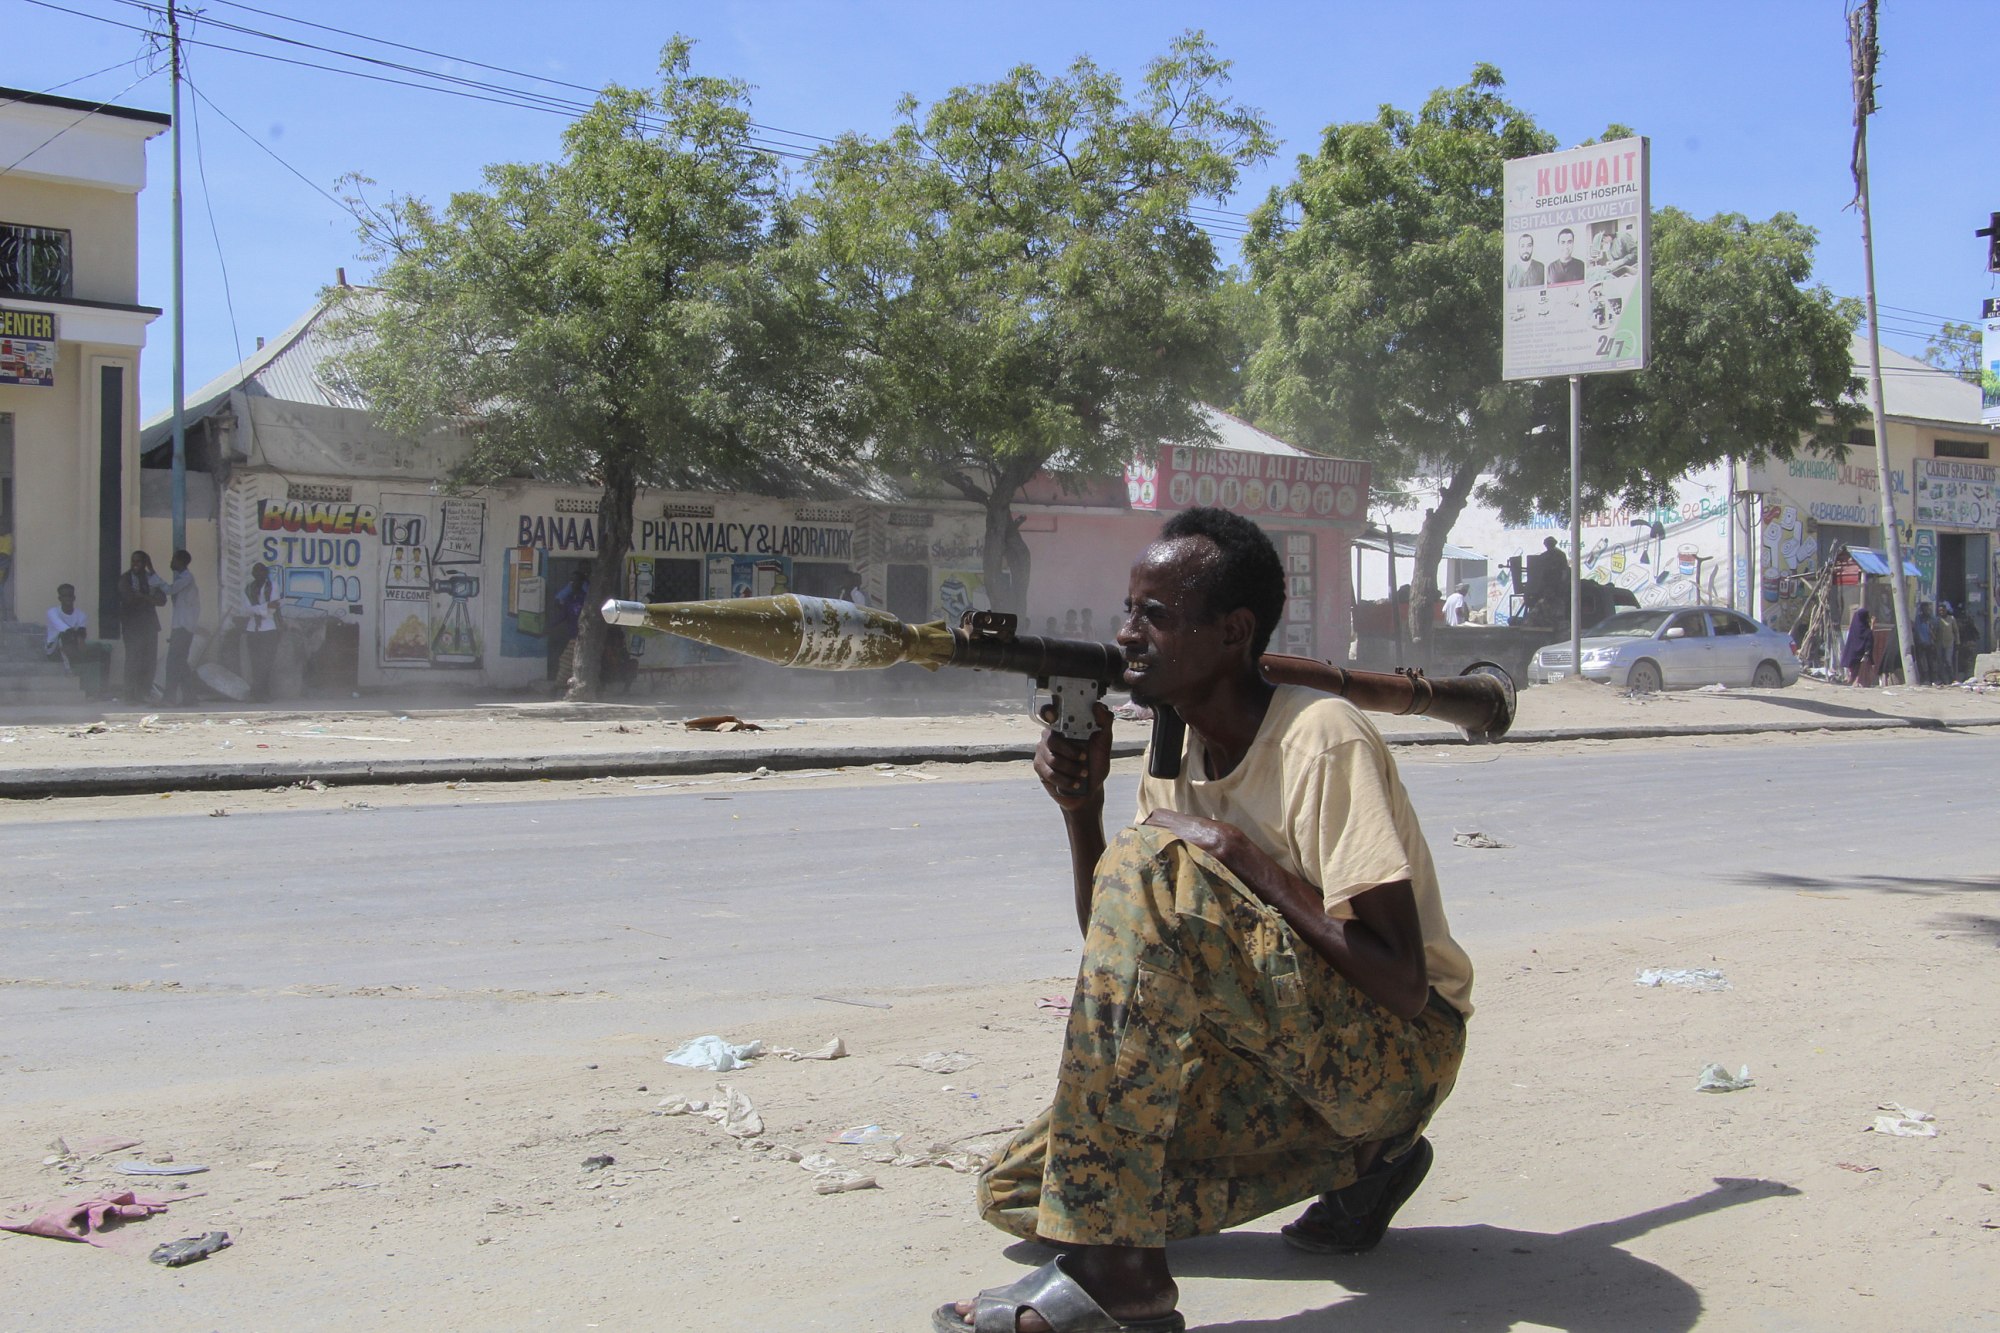 Somali president suspends PM's powers, accusing him of looting